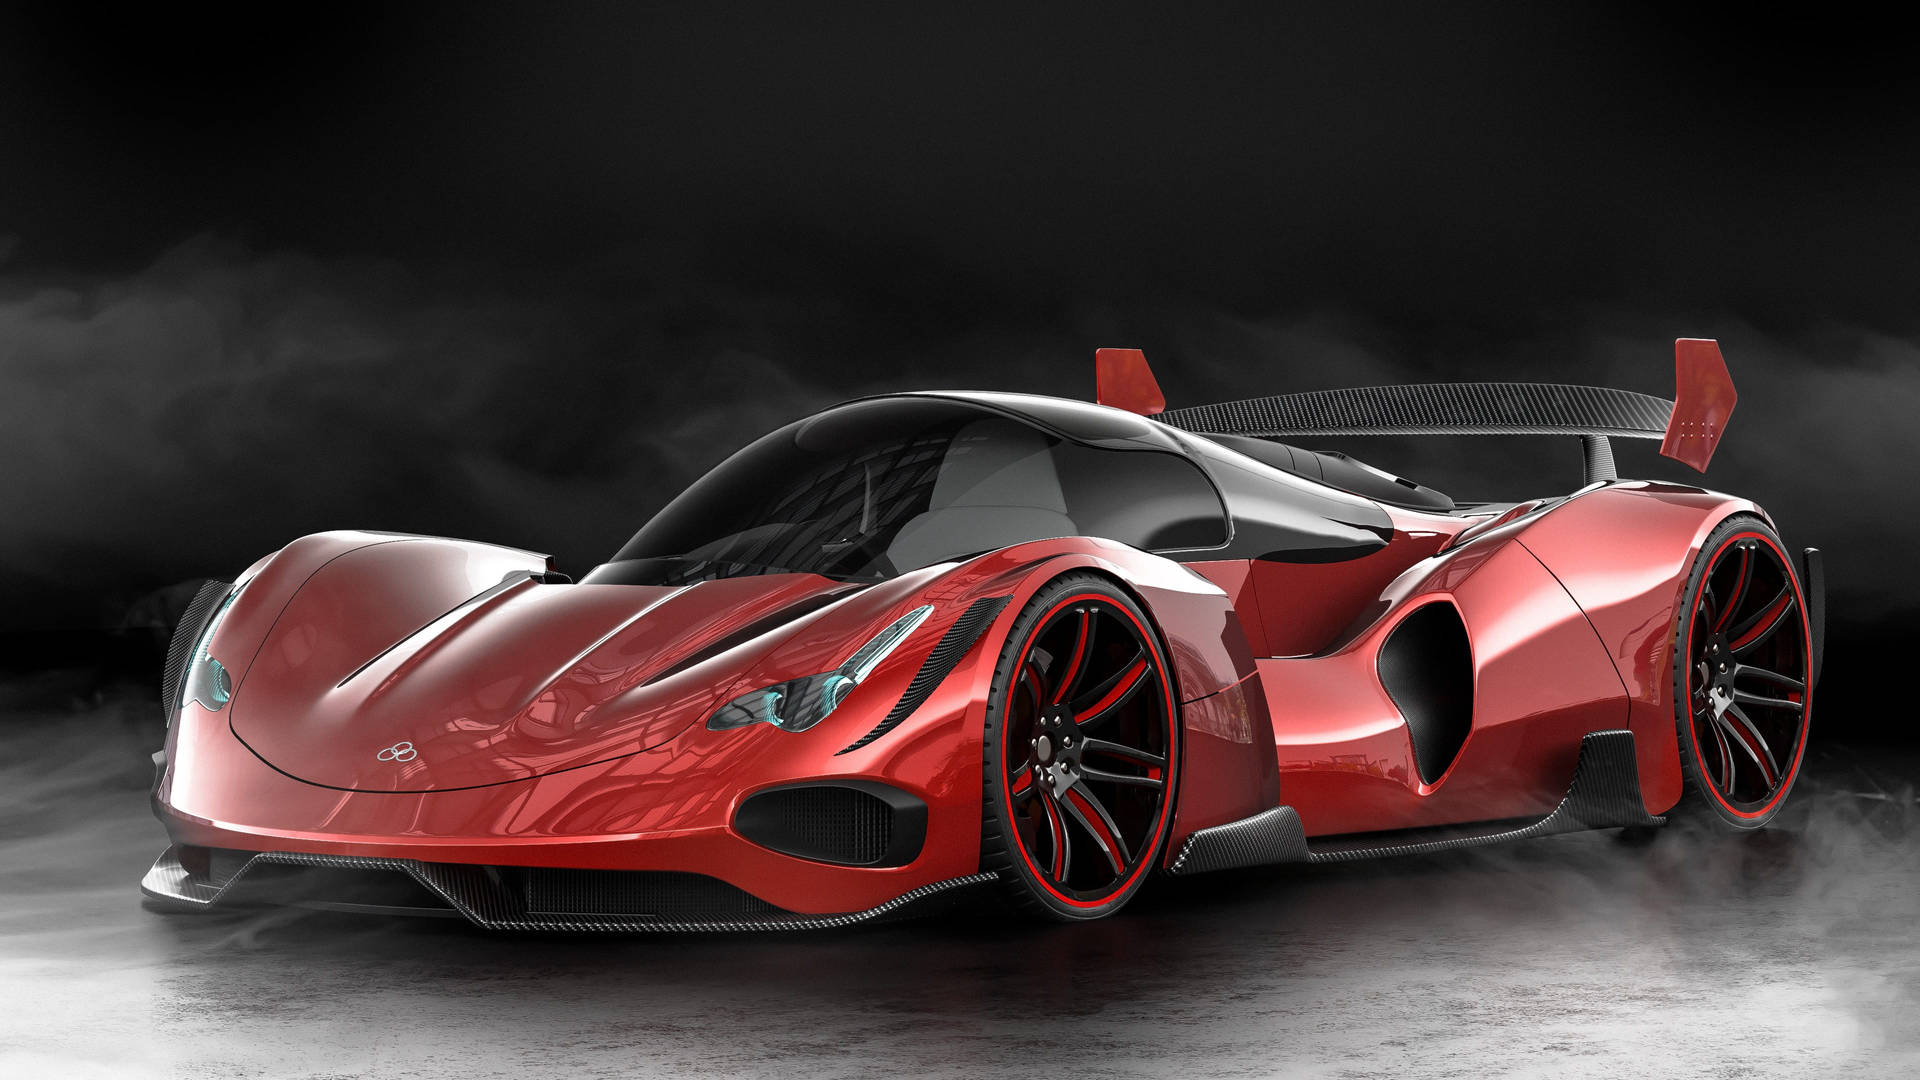 Cool Red Concept 3d Car Background